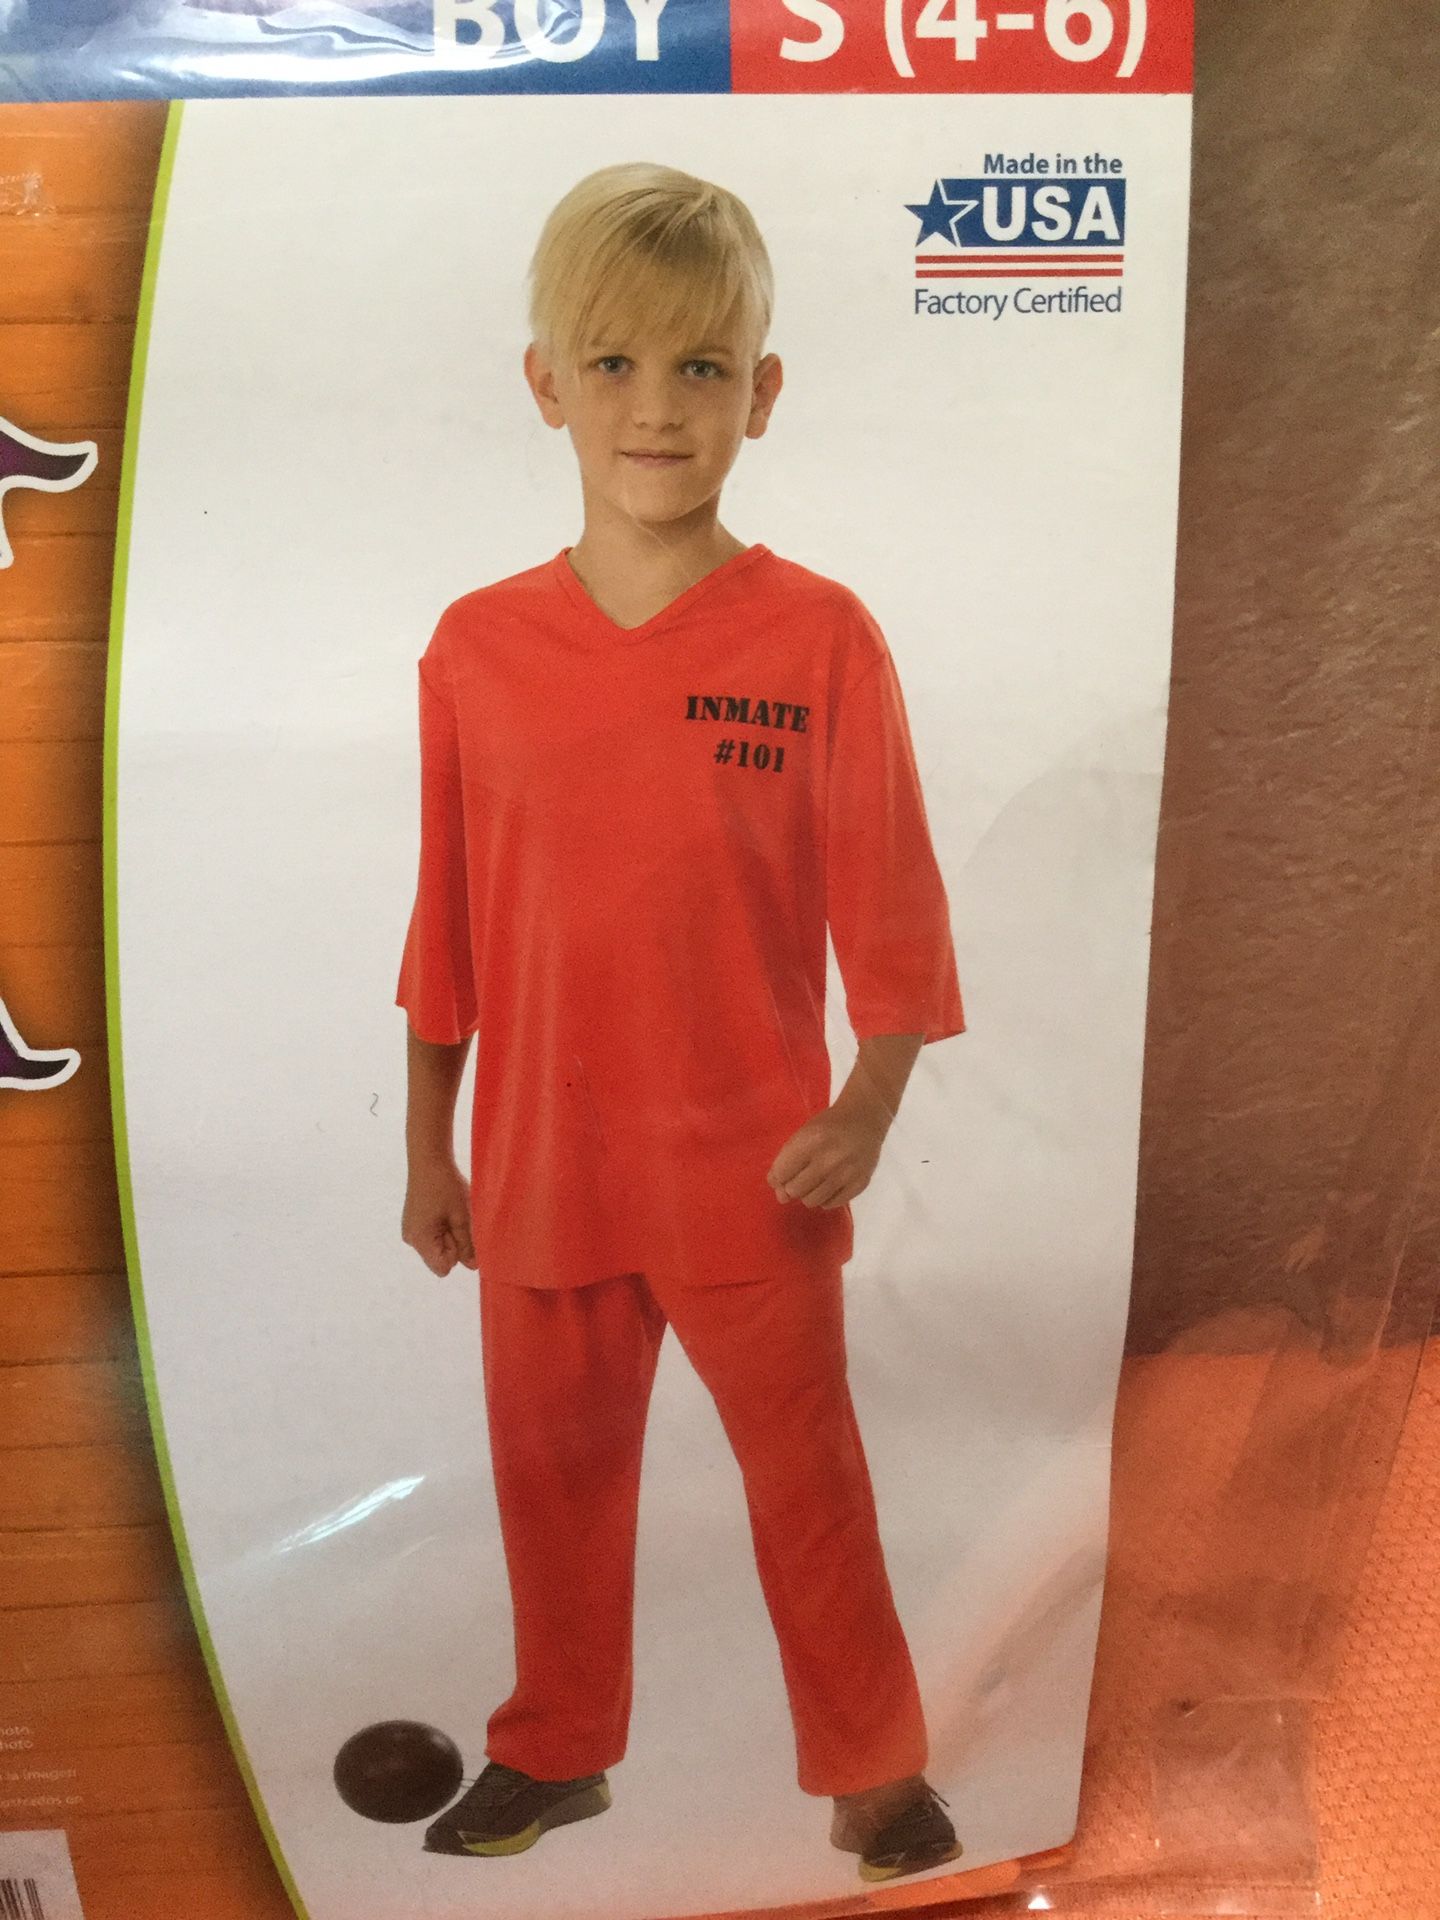 New Inmate 101 orange Halloween costume size small 4 to 6..$3......#54..... 9020 N. 91st ave. Peoria 85345